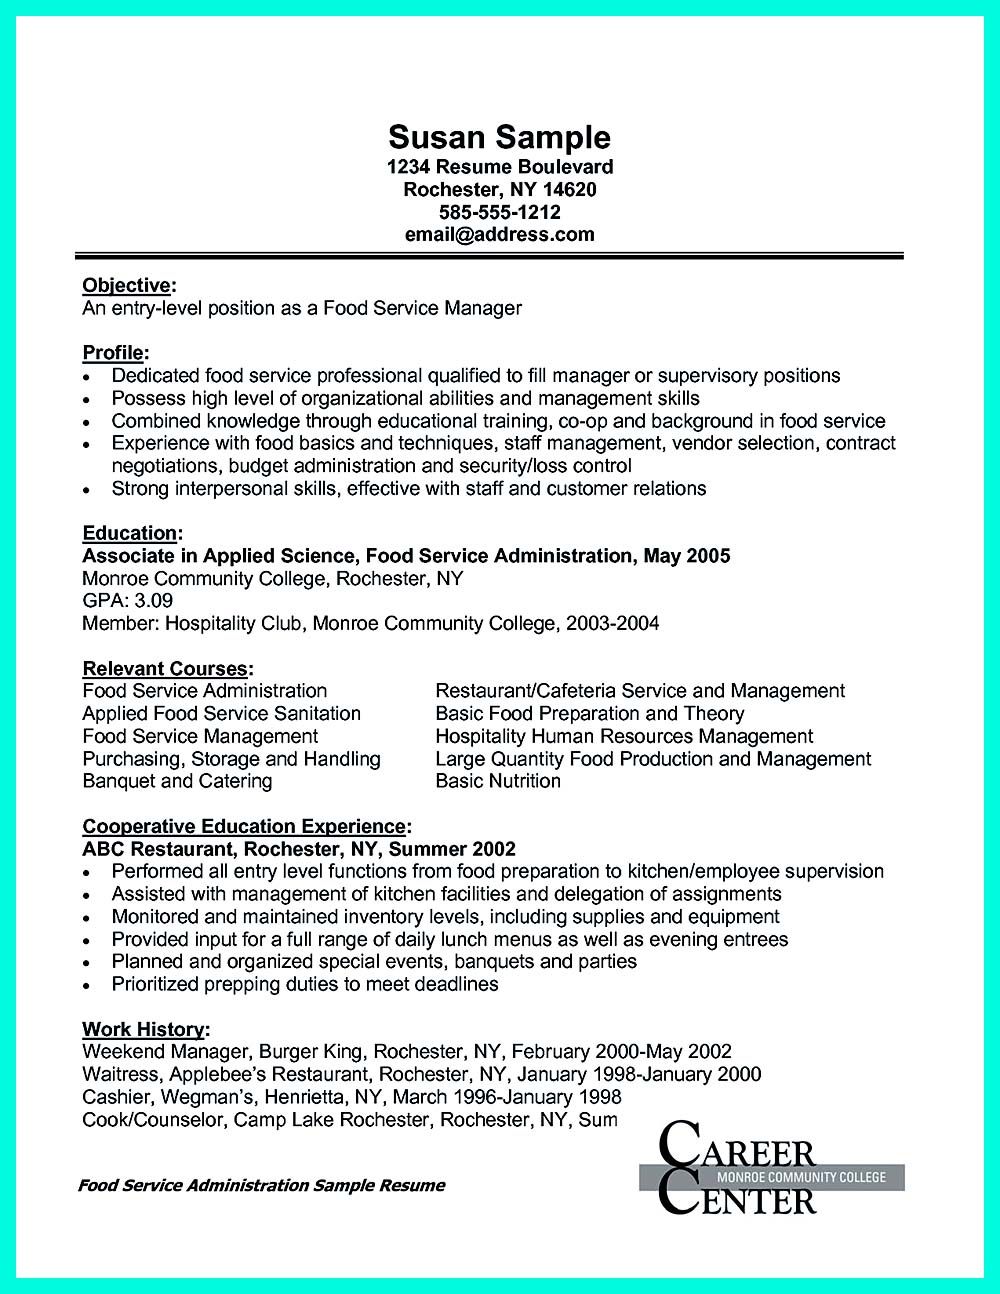 Cafeteria Worker Resume Example 2019 Cafeteria Worker Resume Template 2020,cafeteria worker resume cafeteria worker resume example cafeteria worker resume template